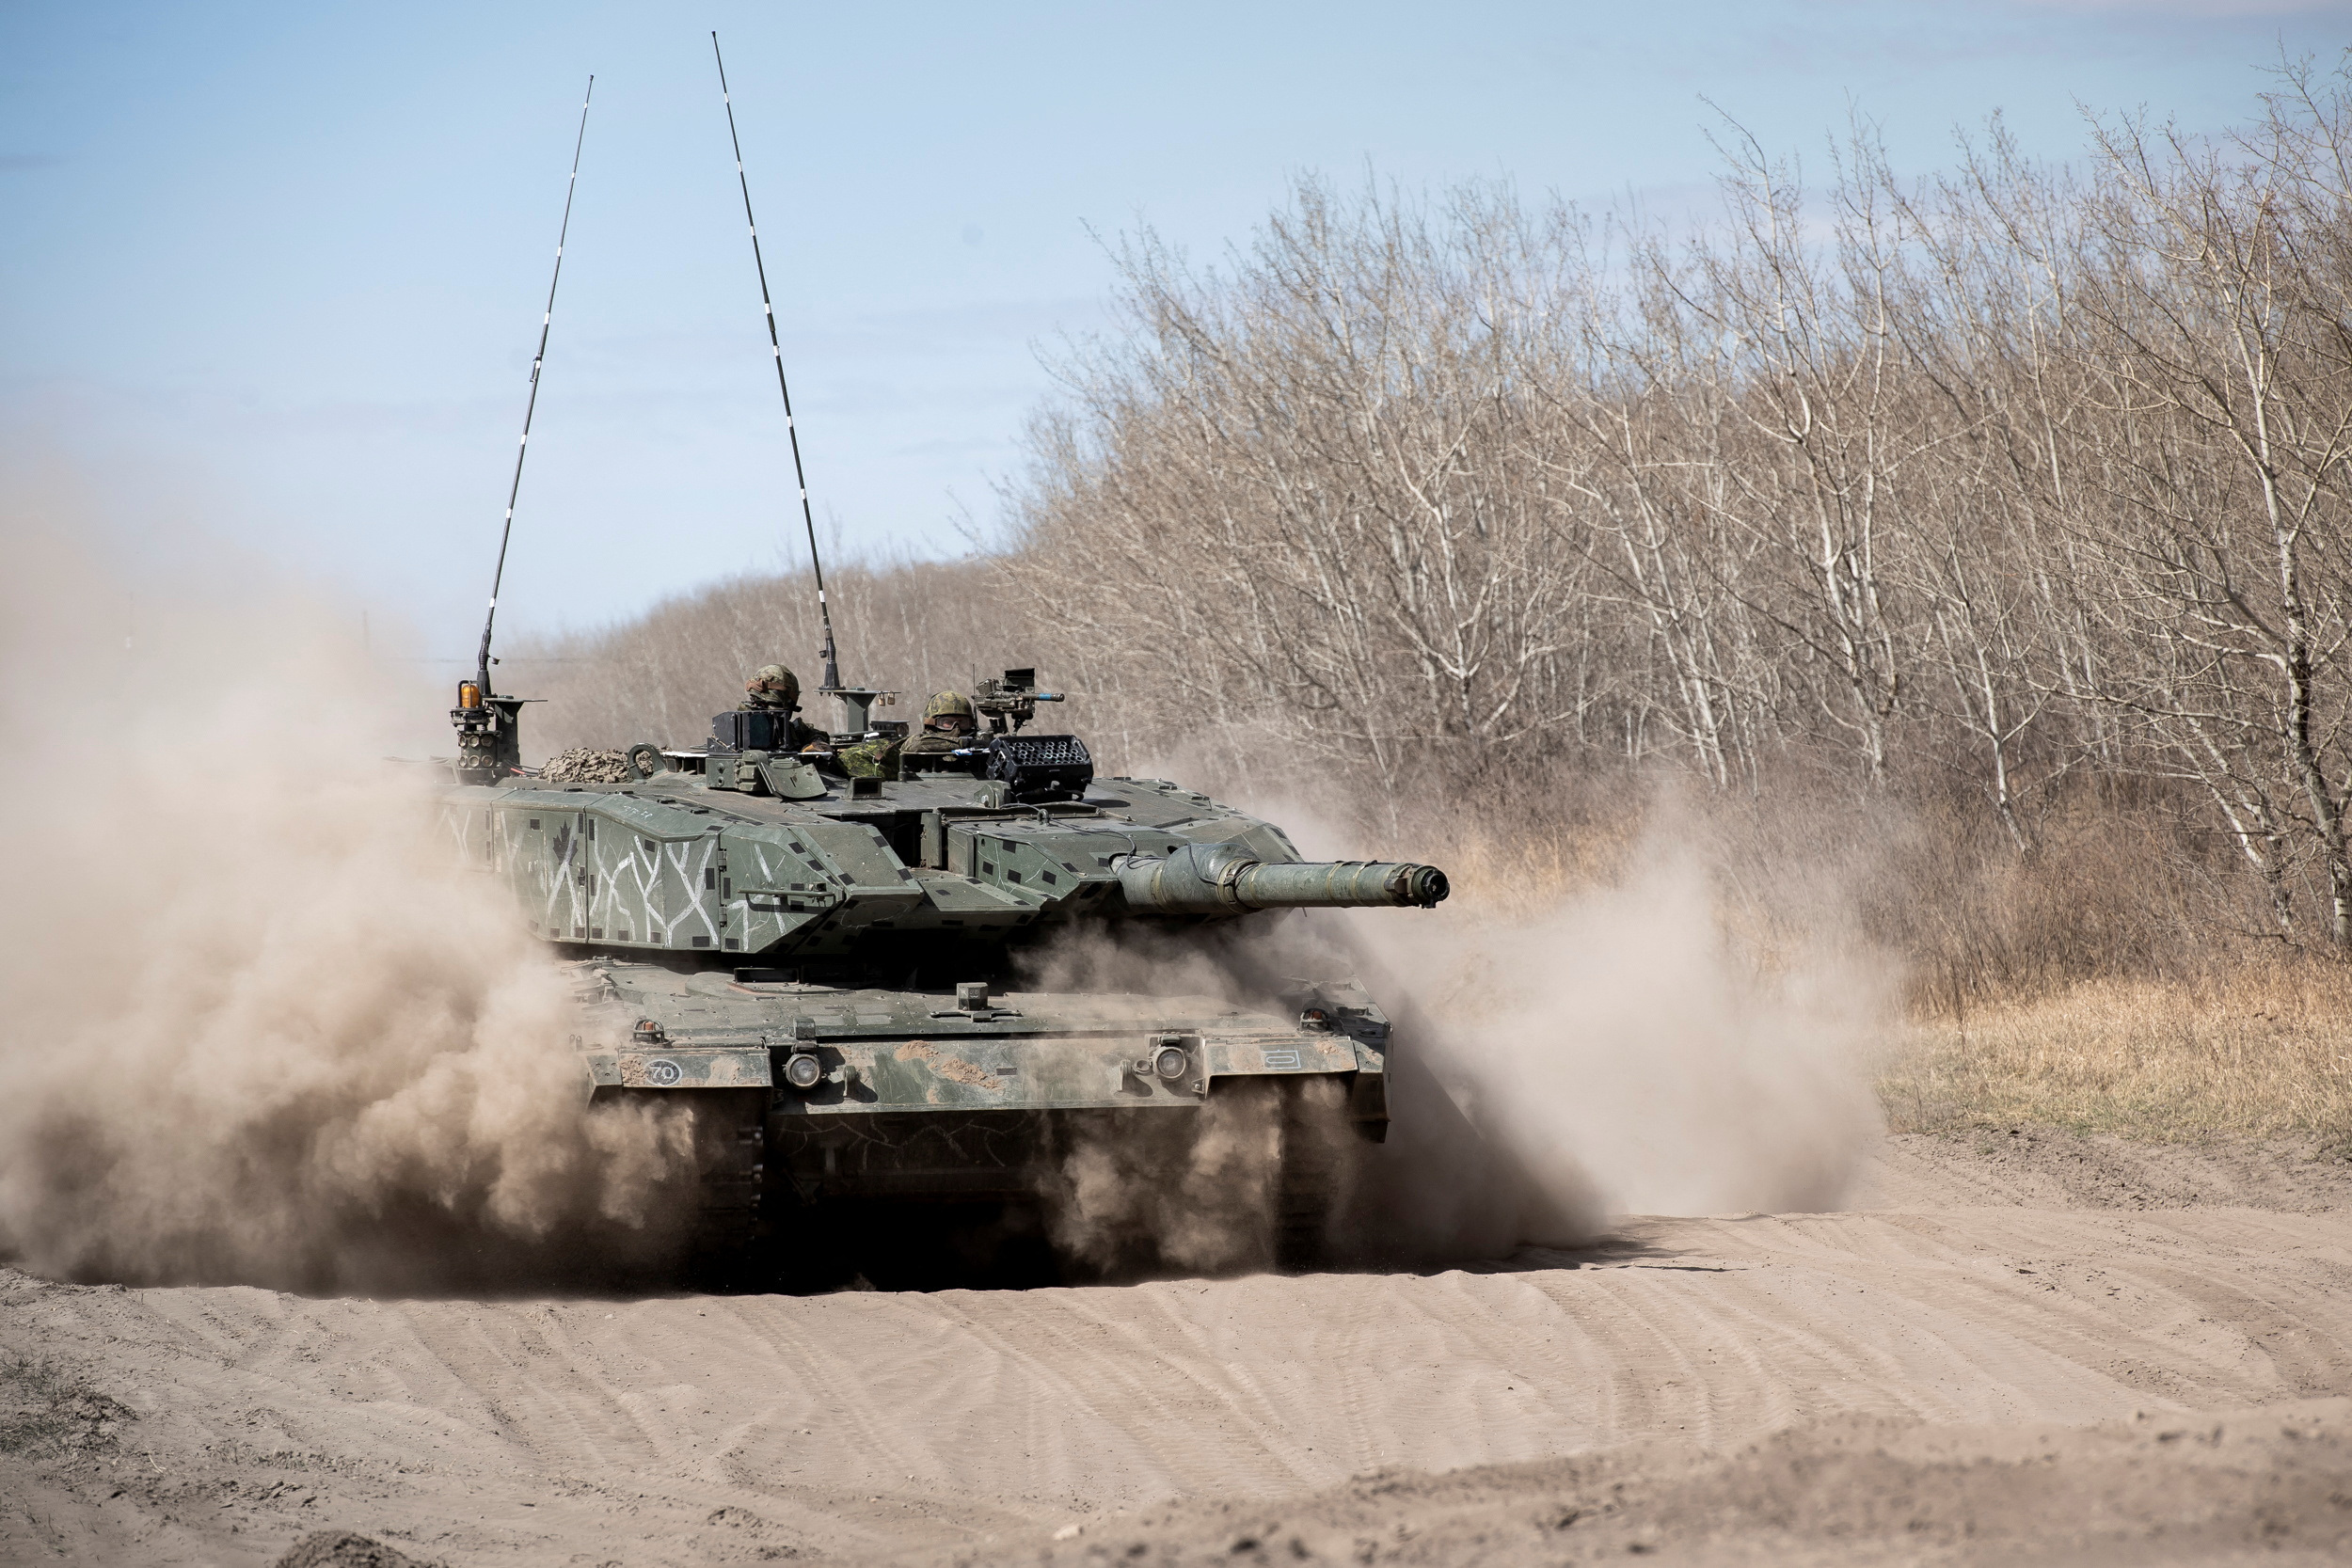 Leopard tank from Lord Strathcona's Horse (Royal Canadians) is taken out after undergoing maintenance in preparation for Exercise MAPLE RESOLVE at 3rd Canadian Division Support Base Detachment Wainwright